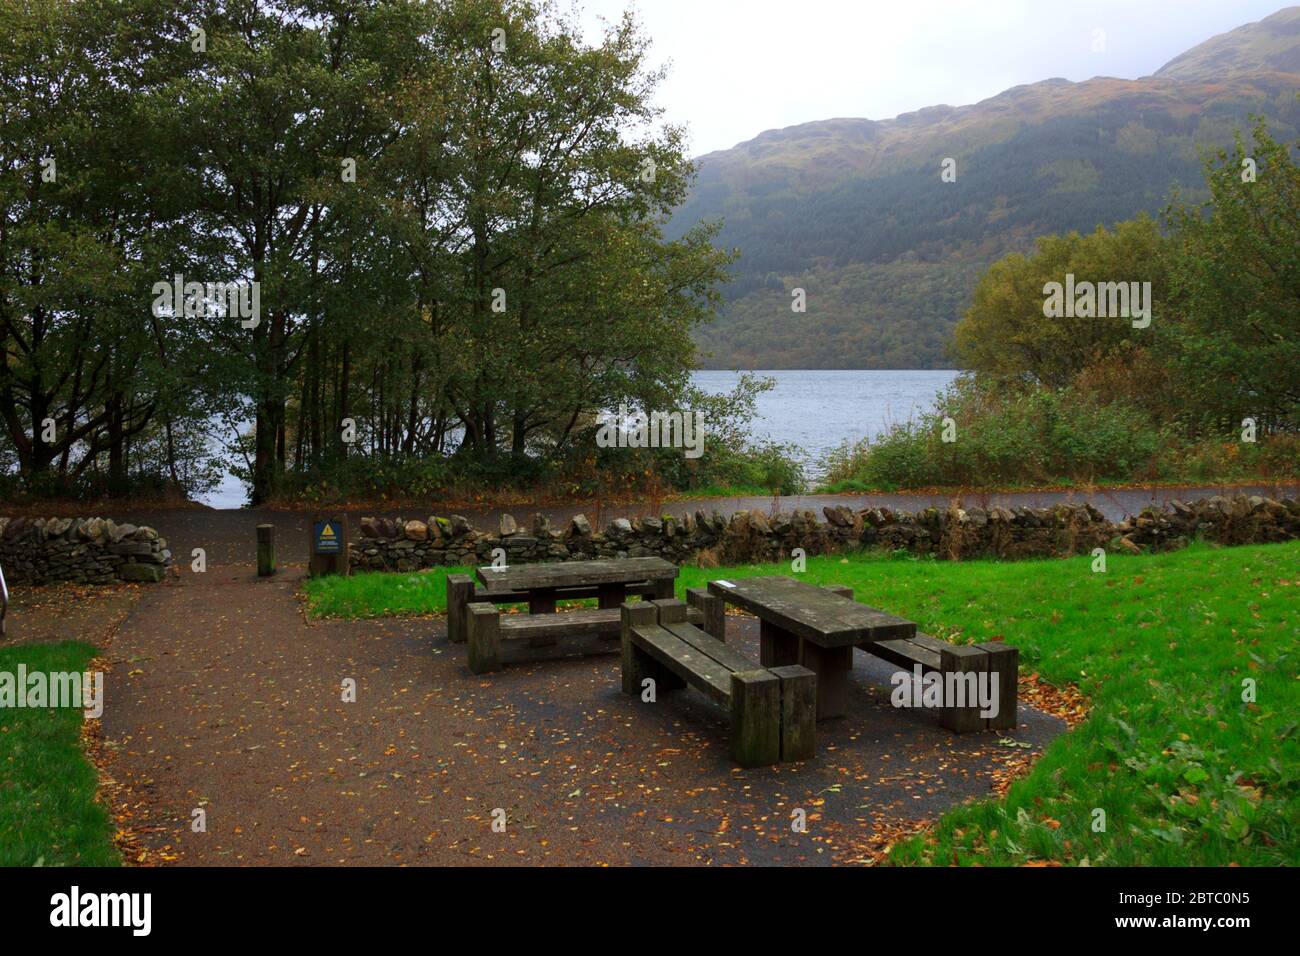 Beautiful landscape at Loch Lomond and The Trossachs National Park in Scotland, UK Stock Photo